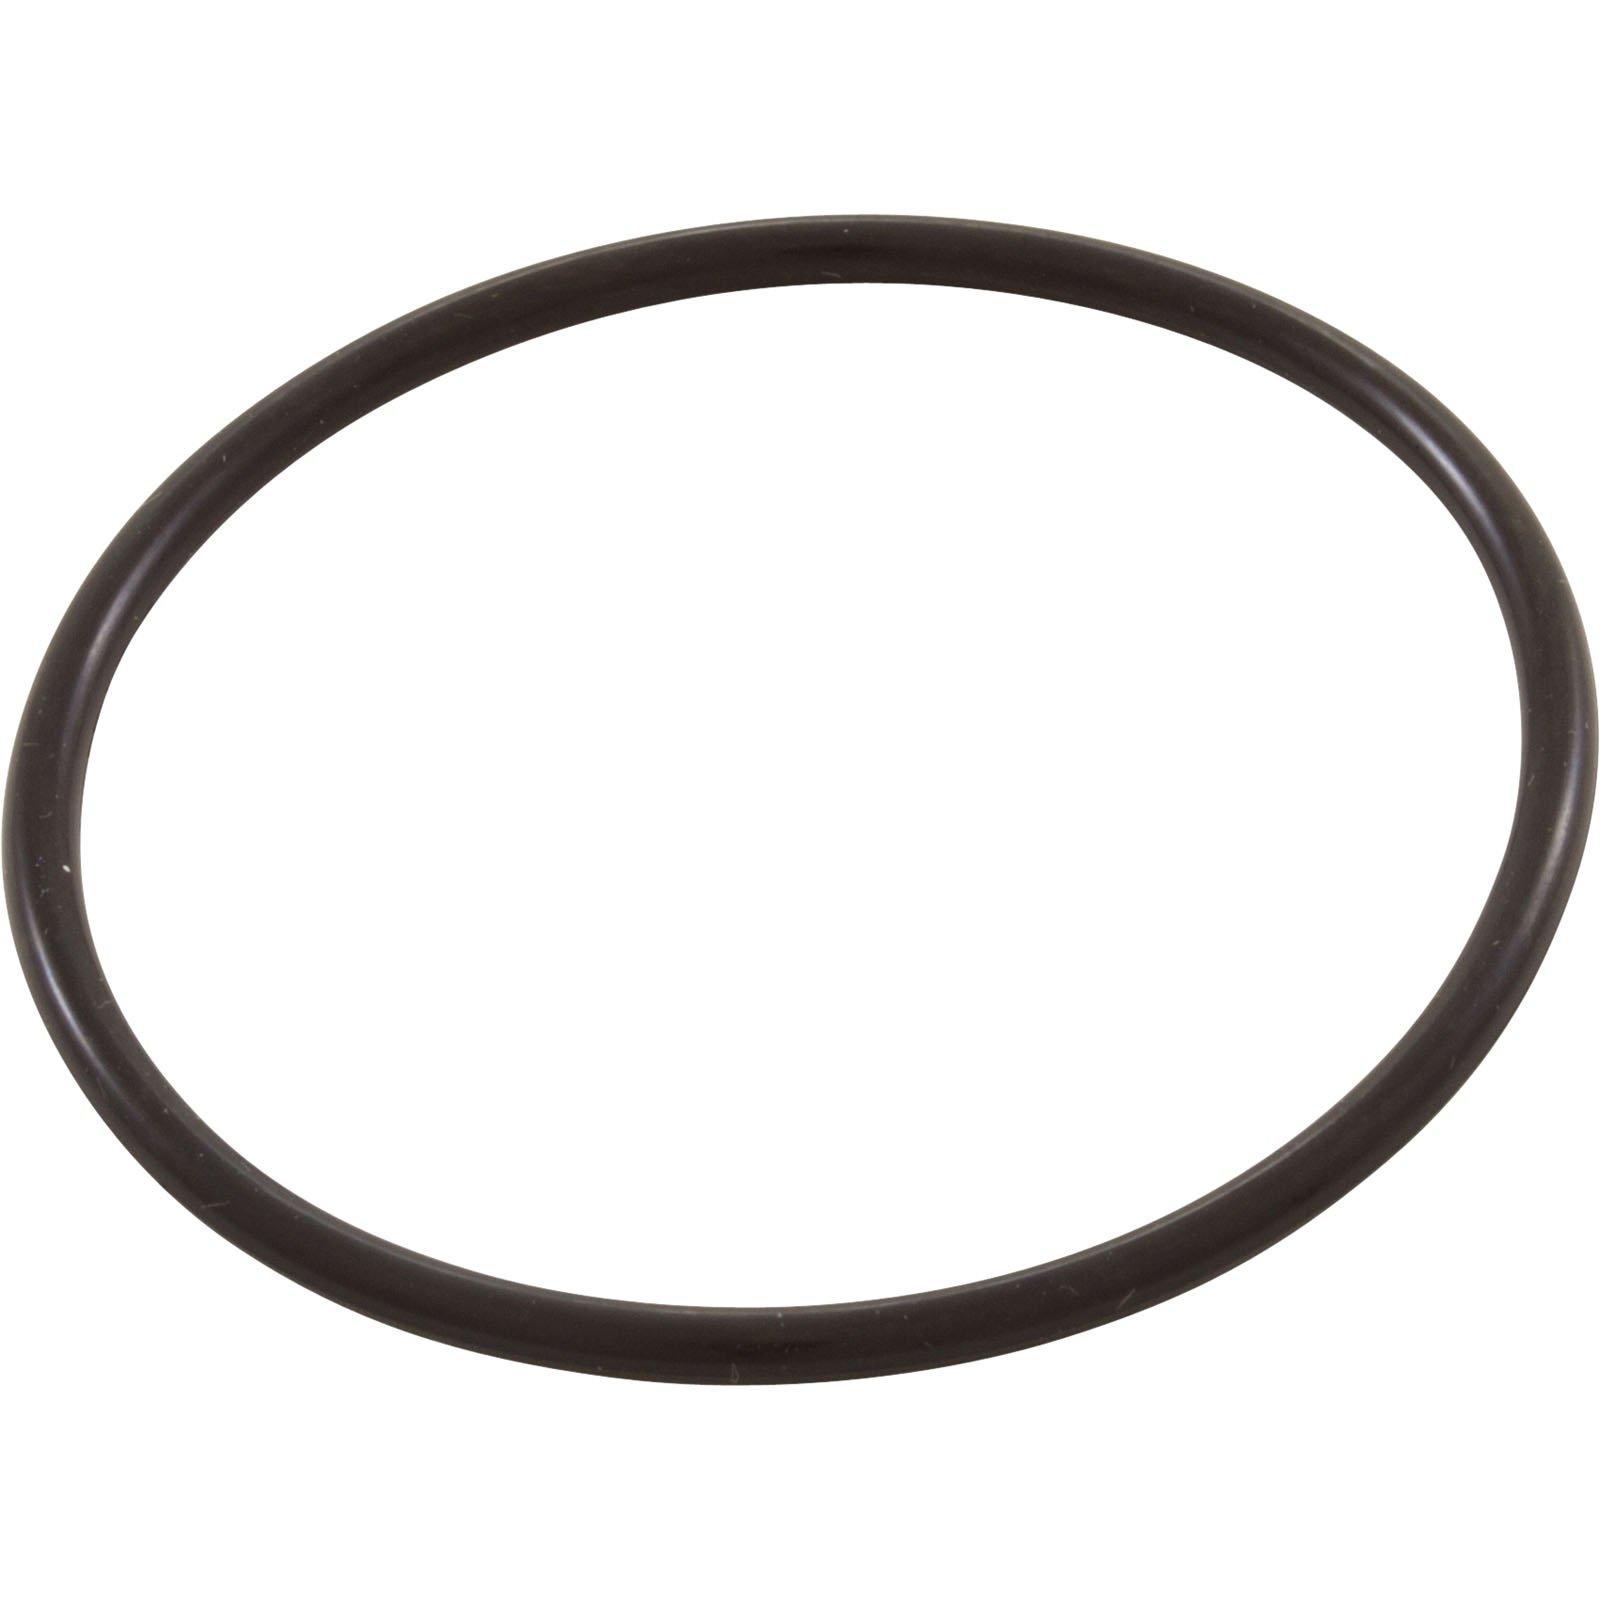 All Seals - Replacement Bulkhead Flange O-Ring